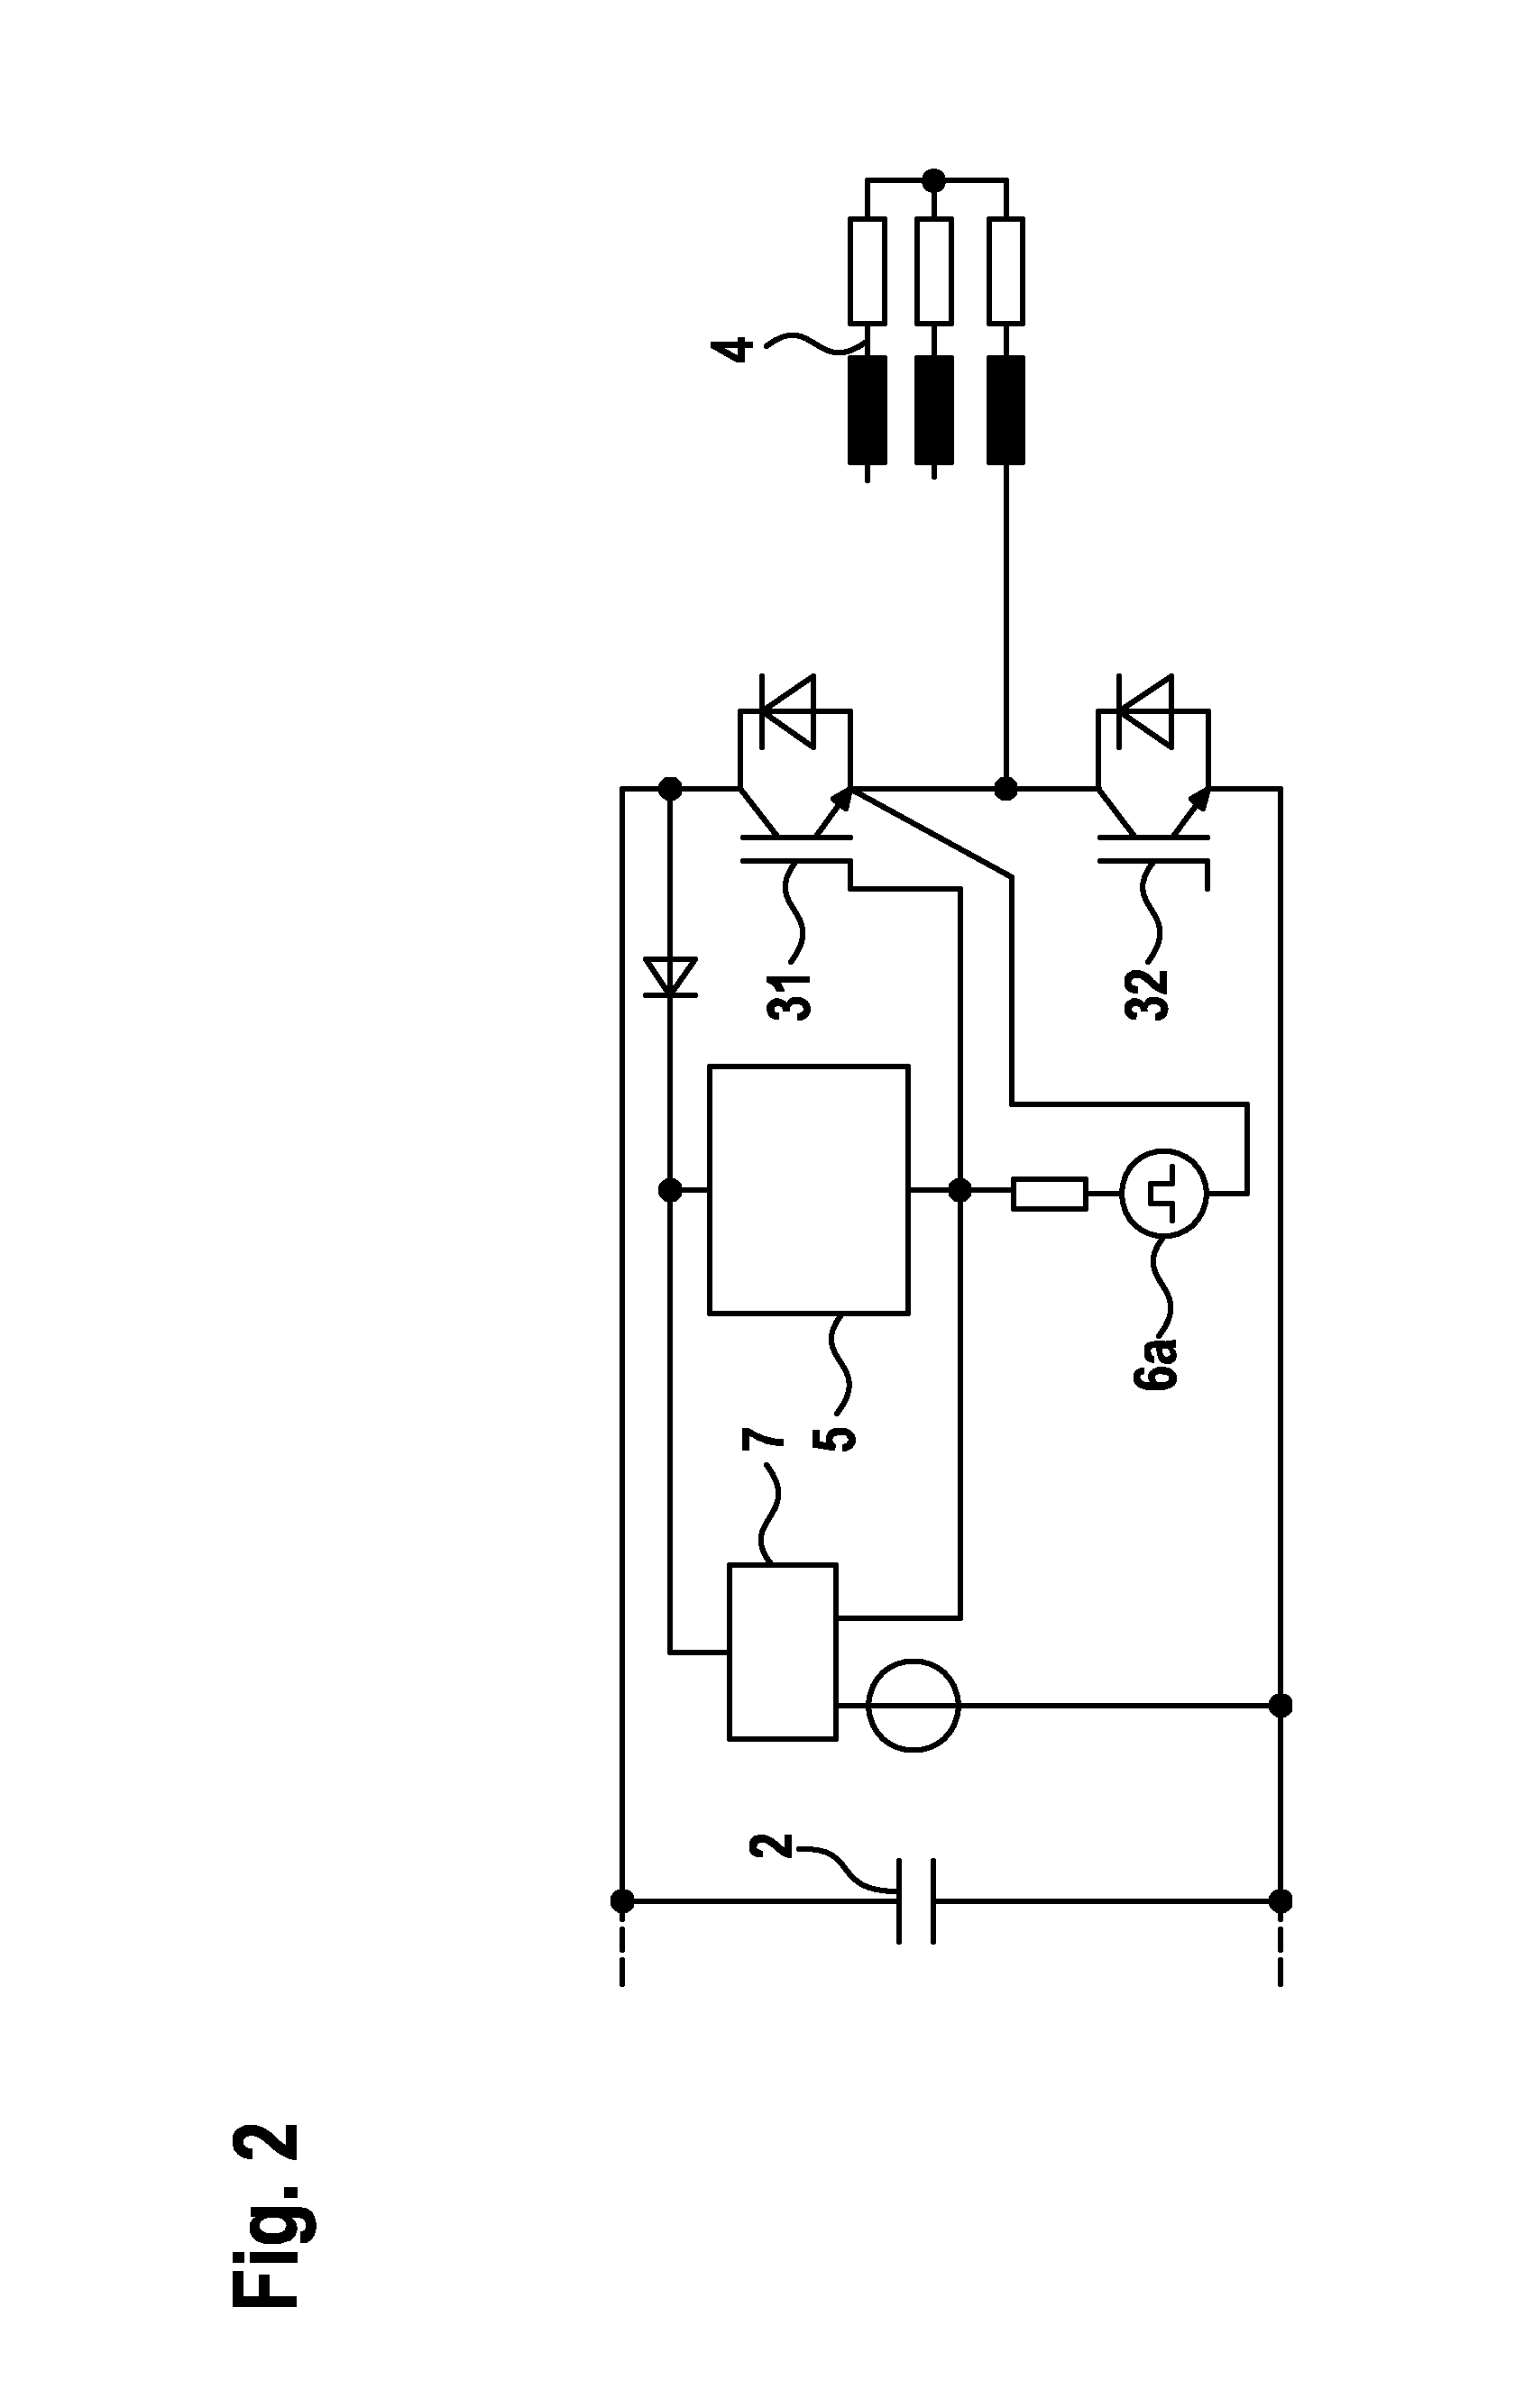 Overvoltage protection circuit for a power semiconductor and method for protecting a power semiconductor from over-voltages